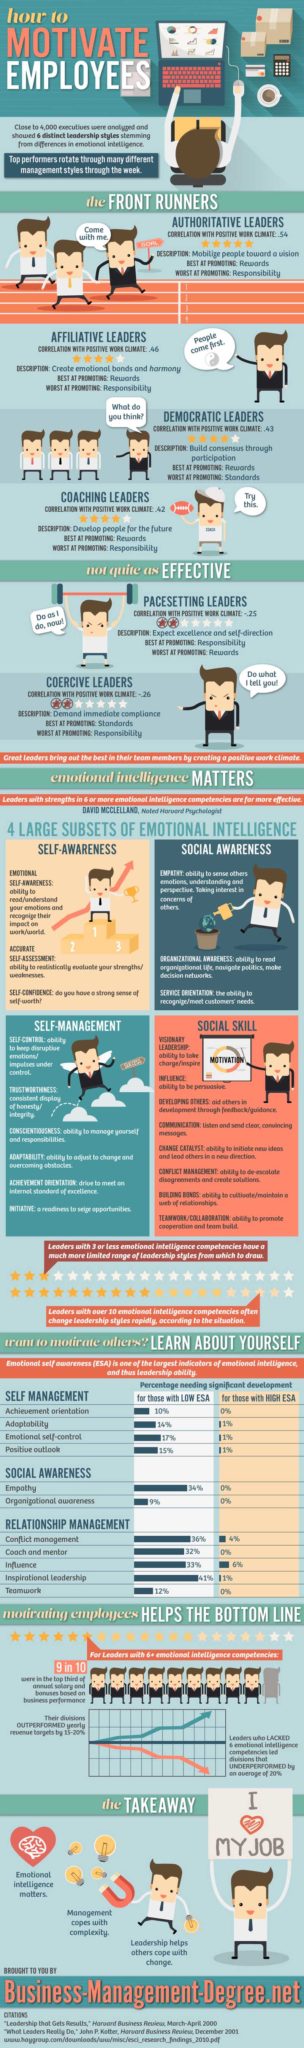 Motivate employees infographic